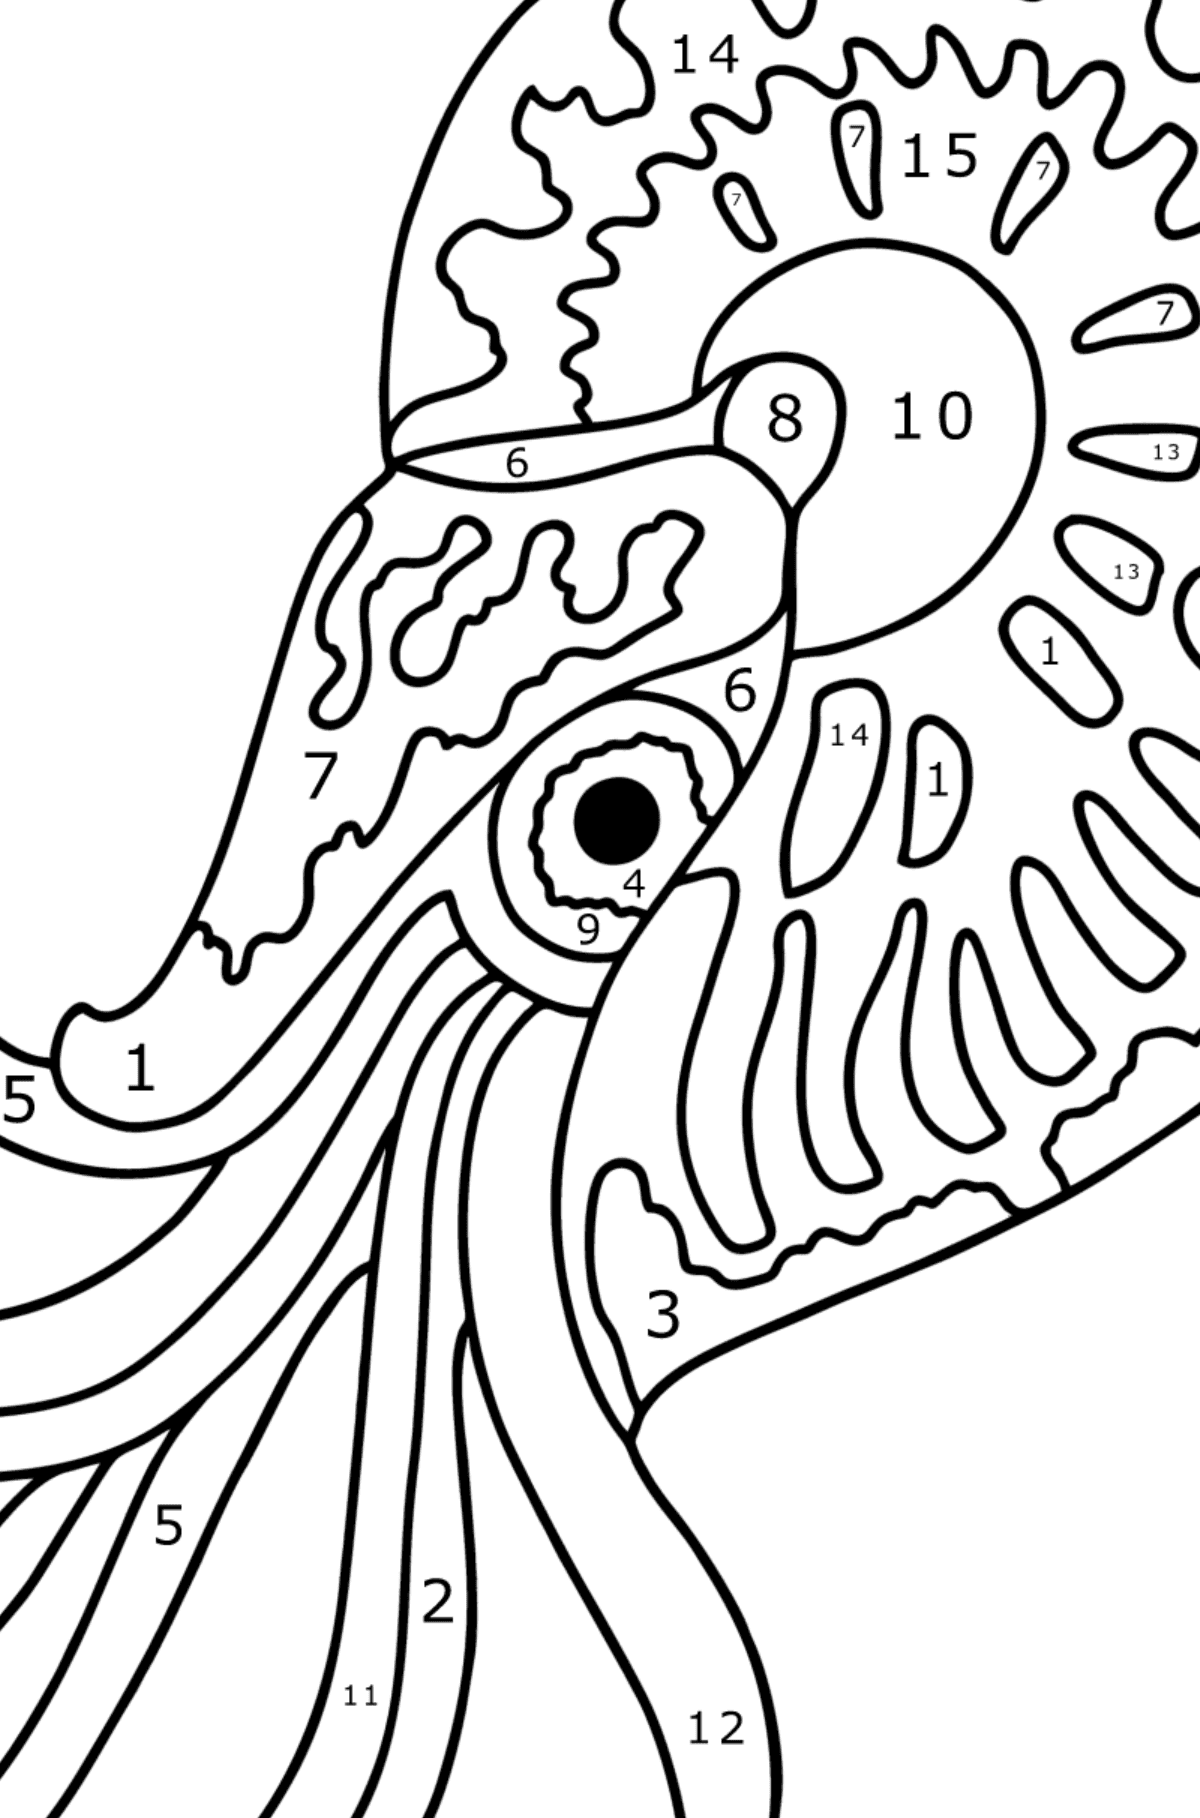 Nautilus coloring page - Coloring by Numbers for Kids